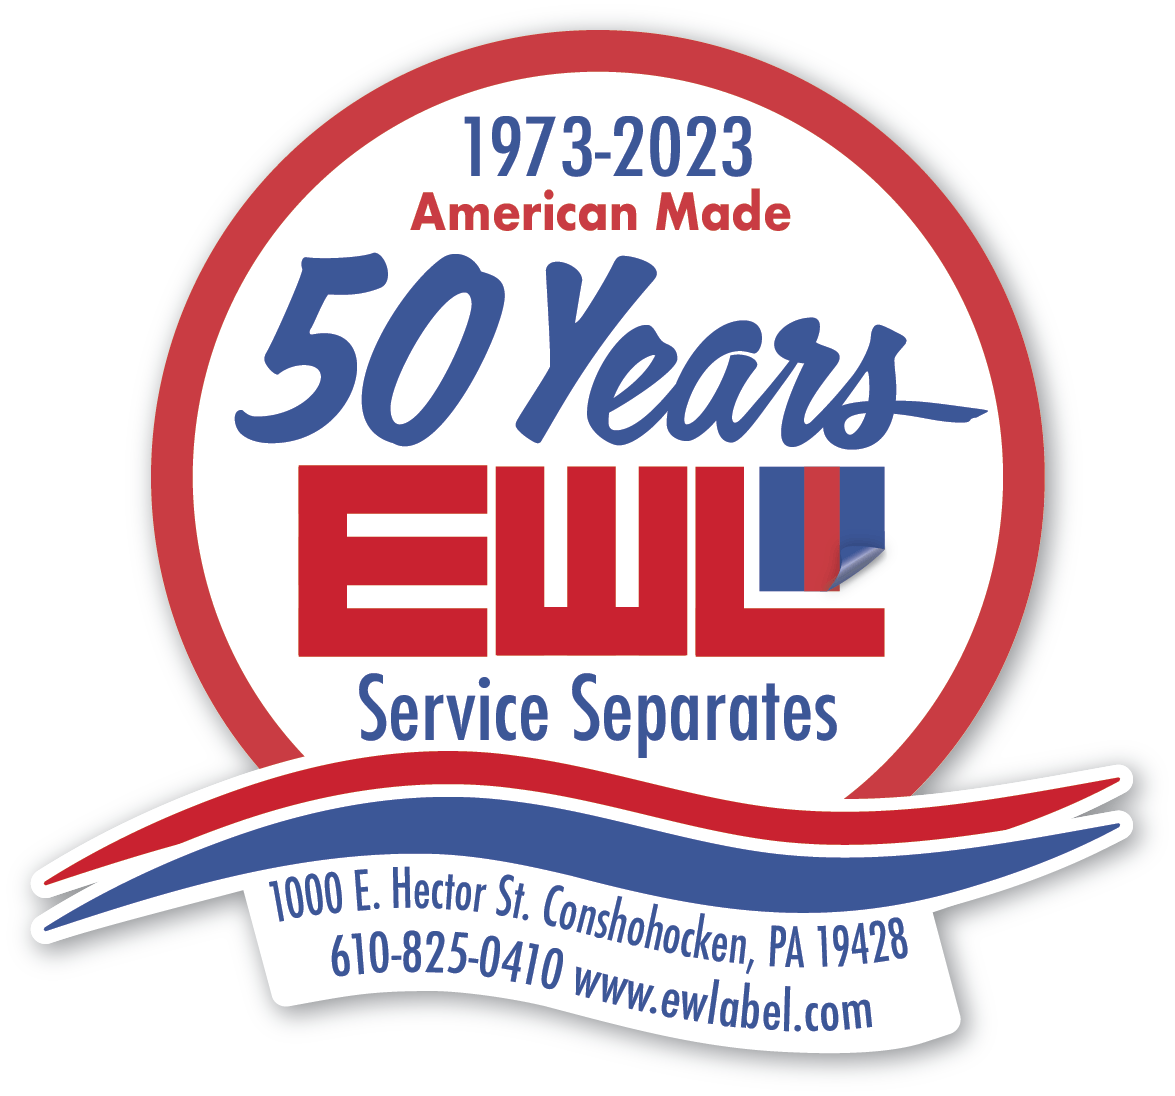 East West Label company 50th Anniversary logo